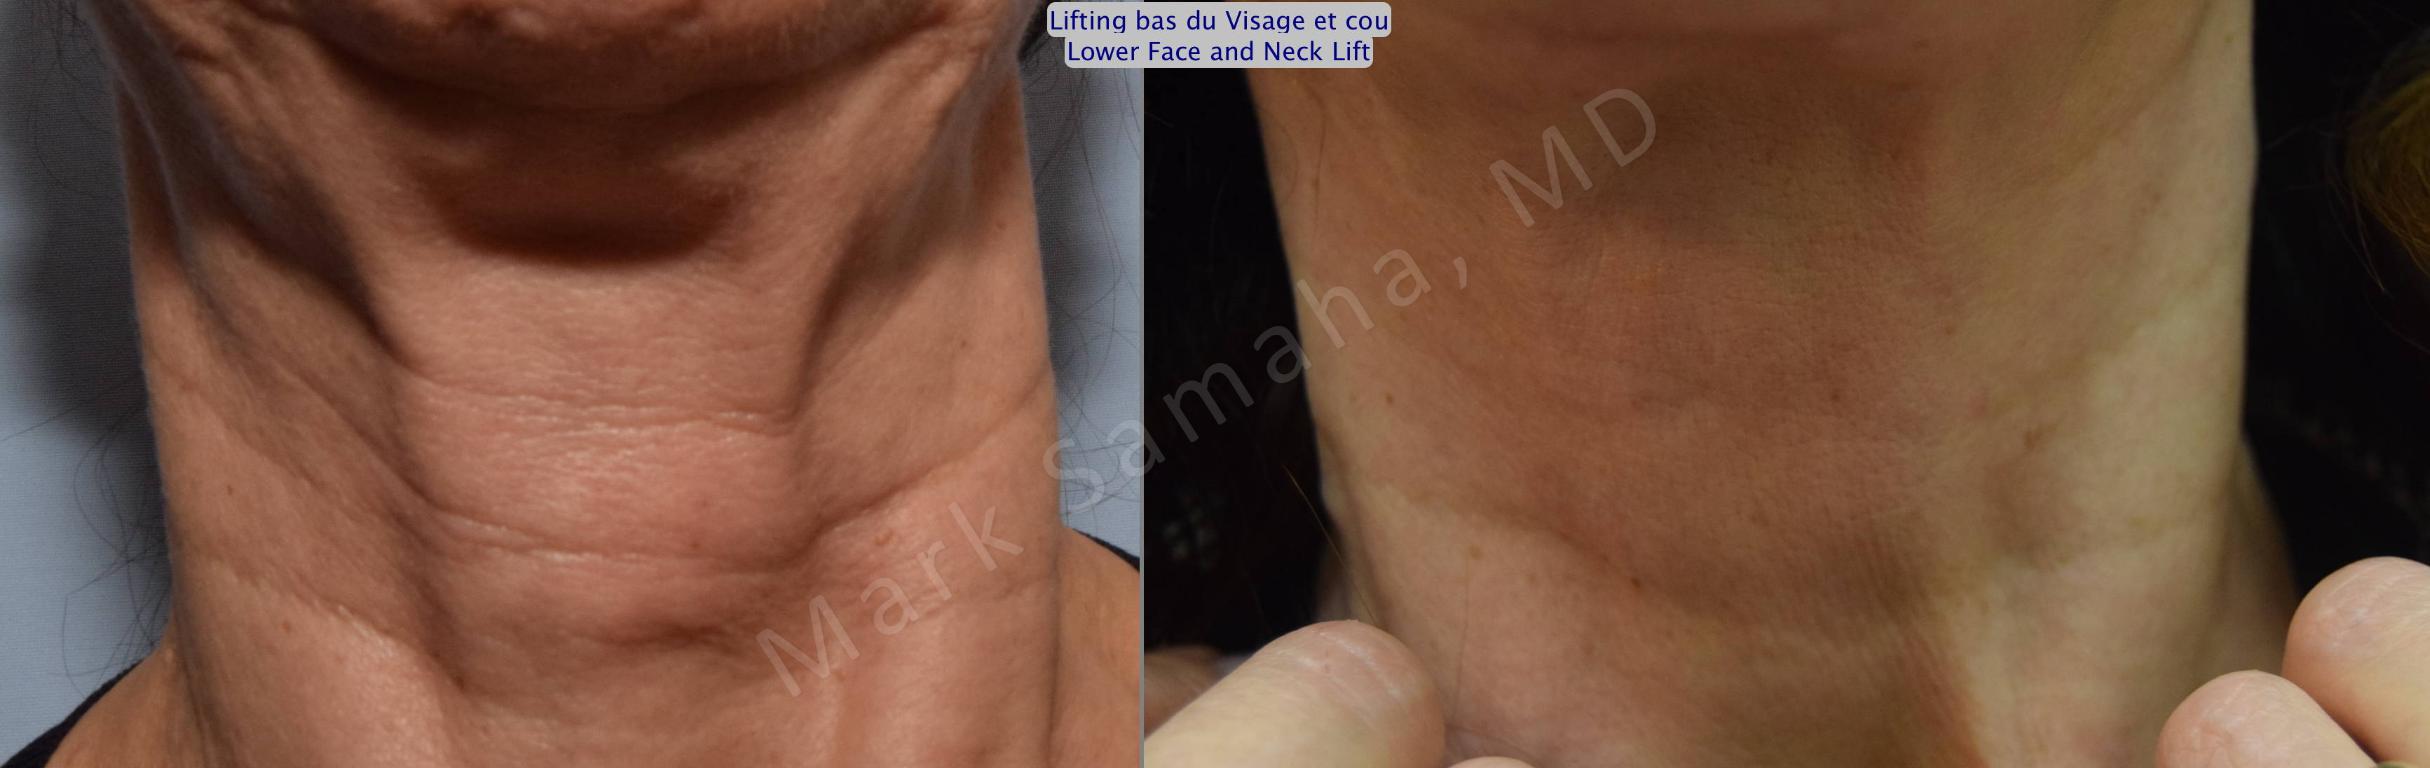 Before & After Facelift / Necklift - Lifting du visage / Cou Case 101 View #2 View in Mount Royal, QC